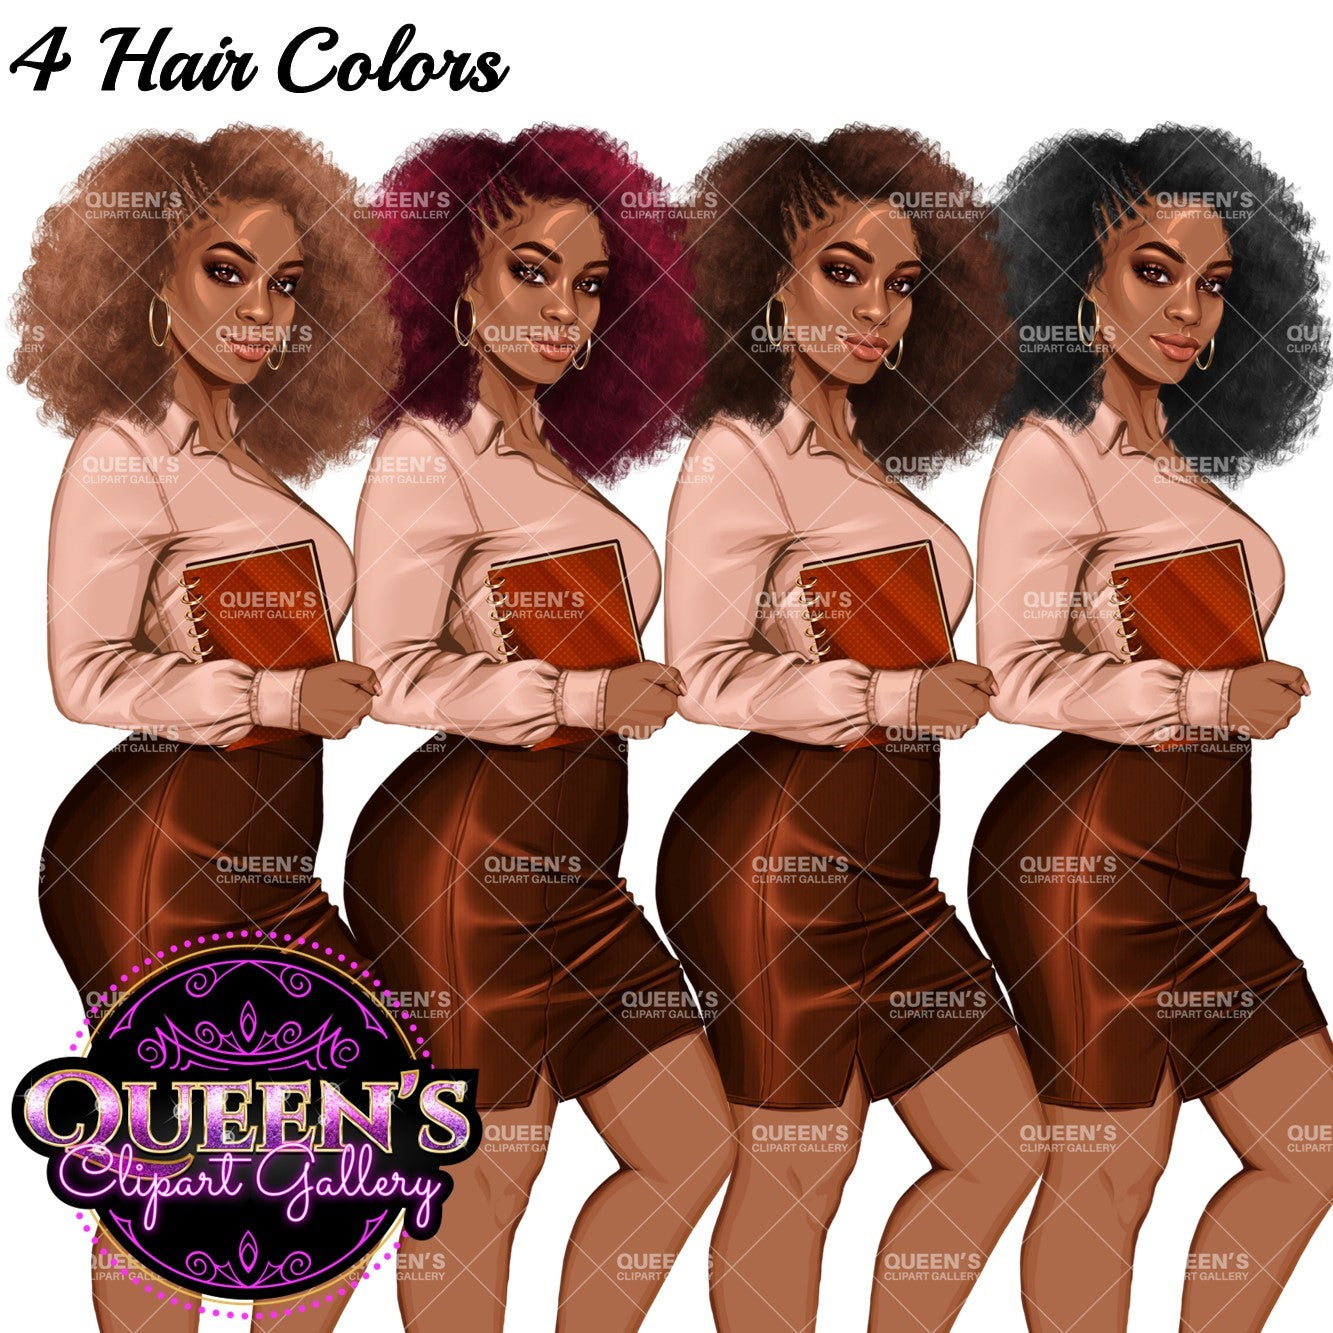 Business planner clipart, Lady boss clipart, Afro girl clipart, Fashion girl clipart, Teacher clipart, Black girl magic, Business woman